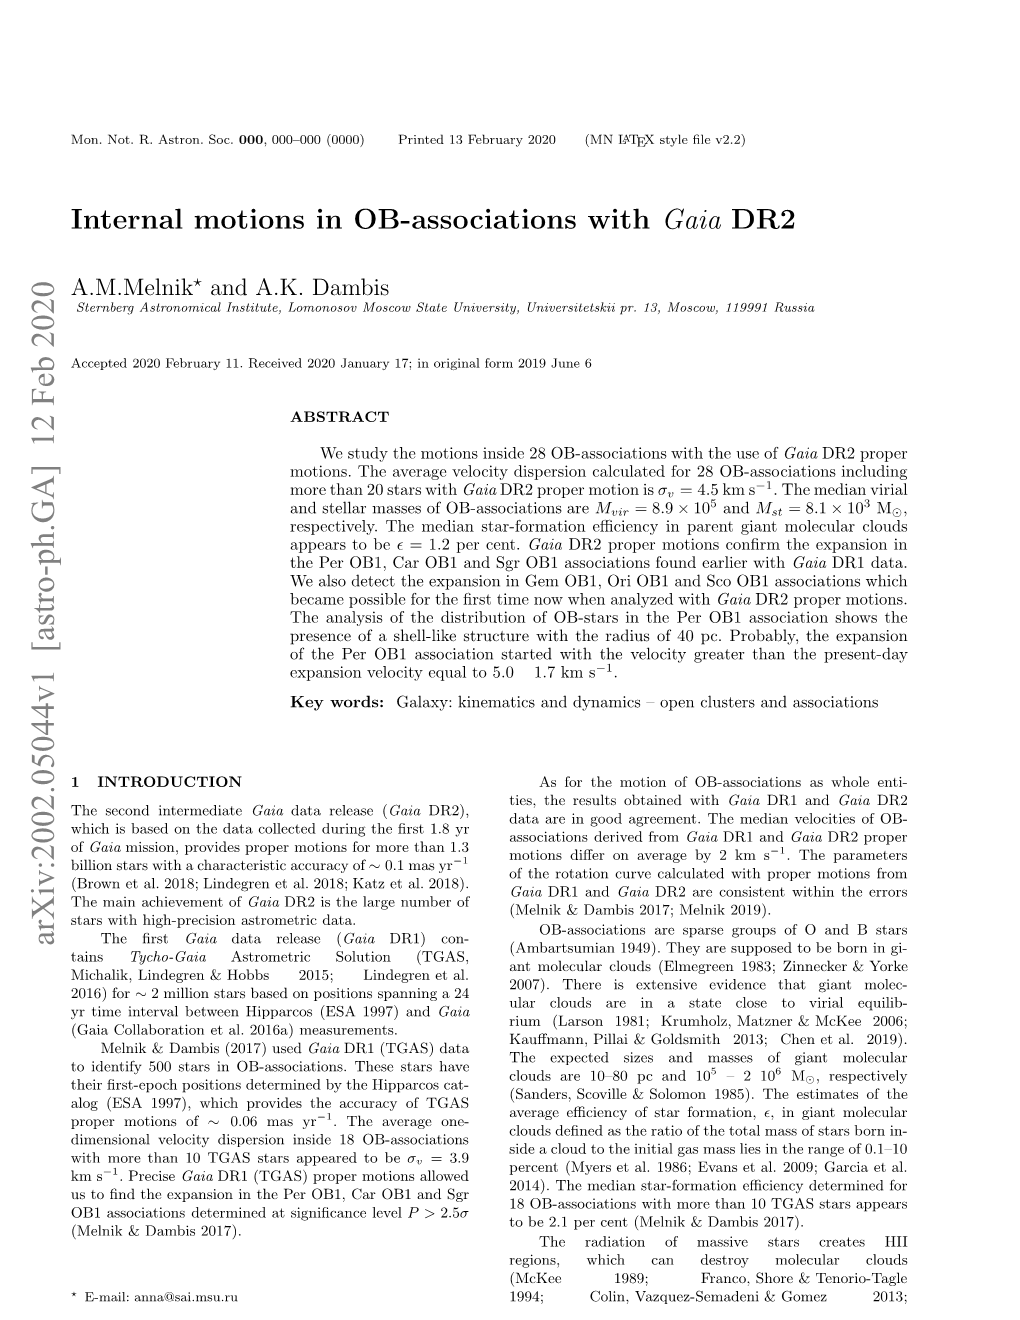 Internal Motions in OB-Associations with Gaia